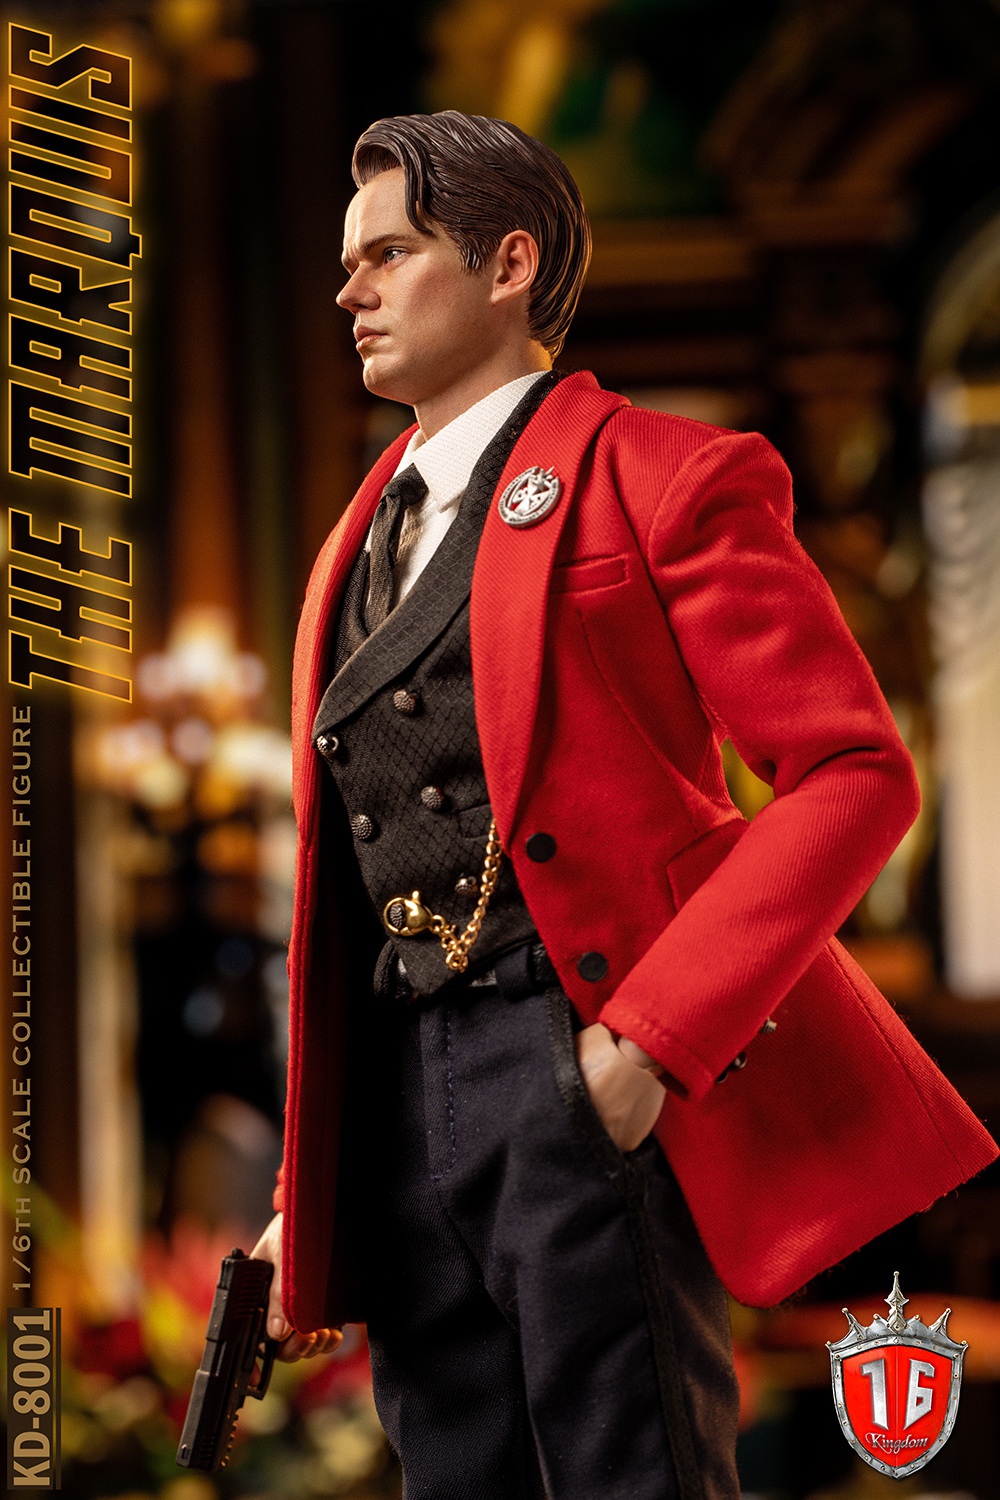 NEW PRODUCT: Kingdom: 1/6 The Marquis Action Figure KD-8001 11405910